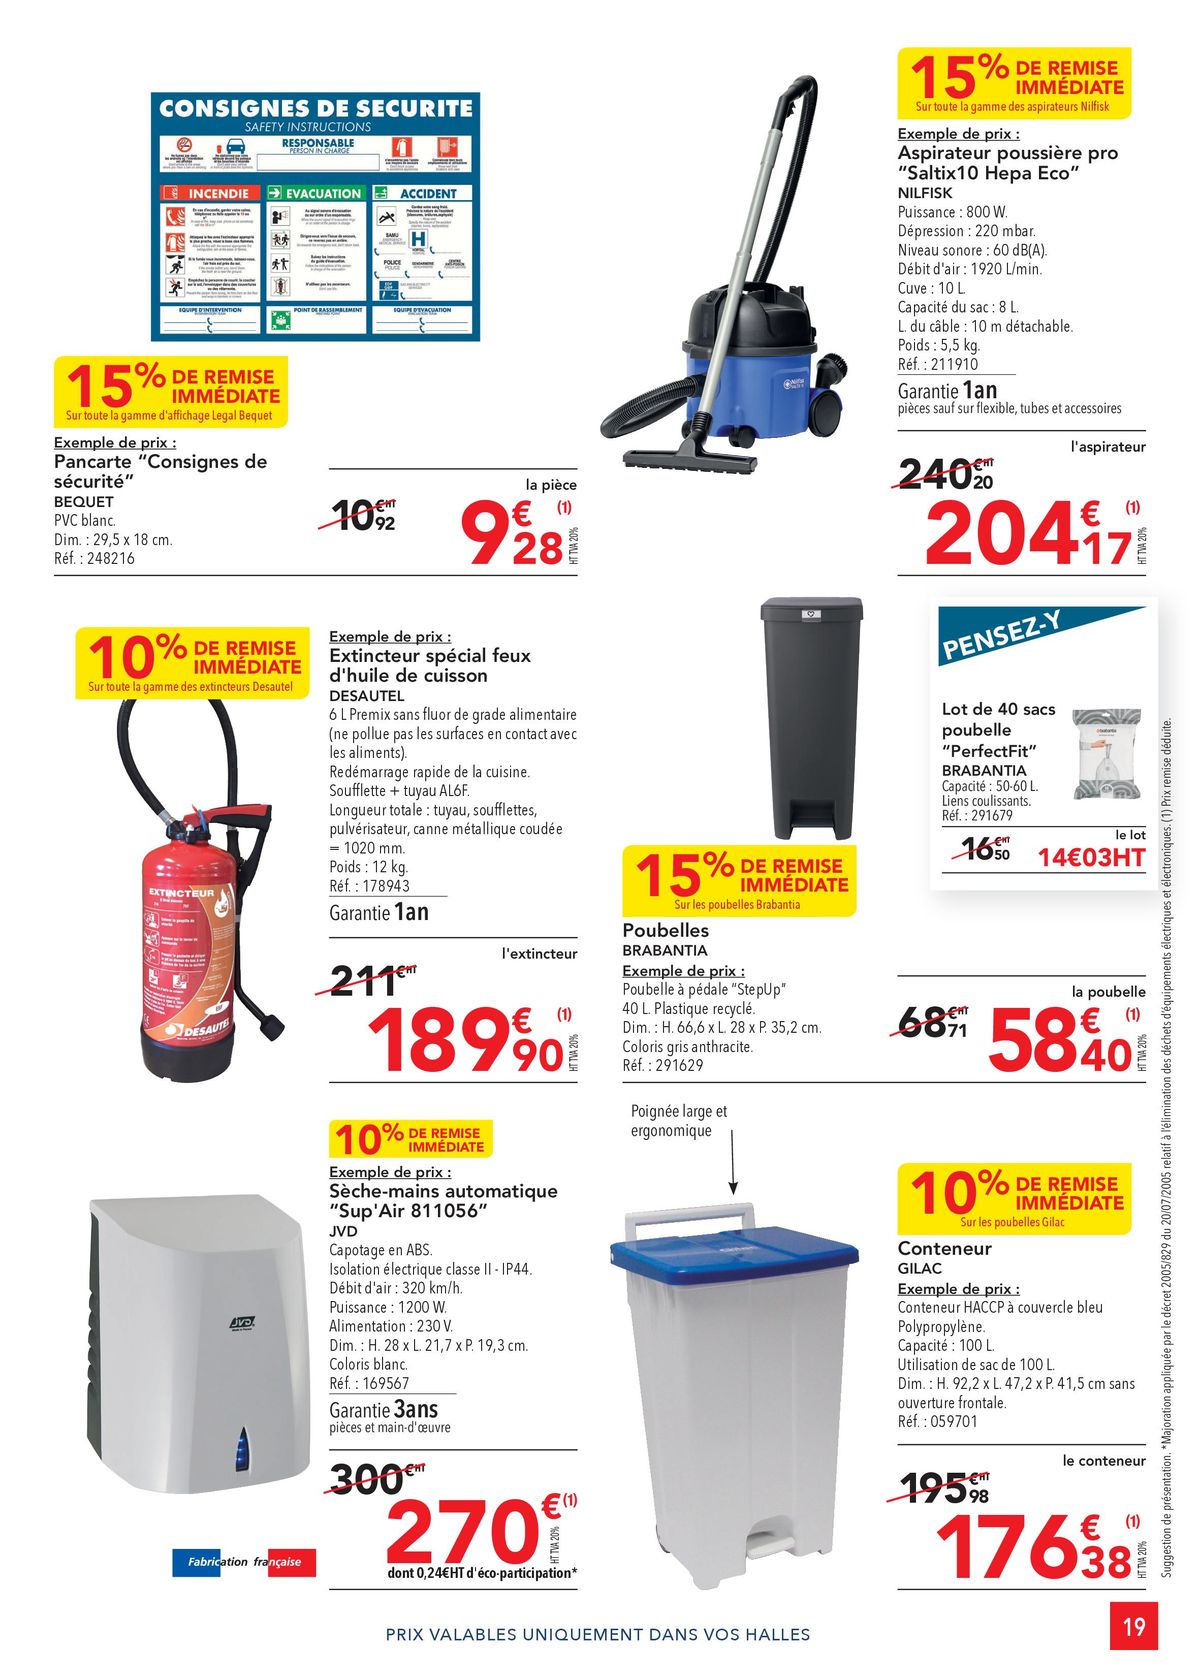 Catalogue SELECTION-PROMO-EQUIPEMENT, page 00019